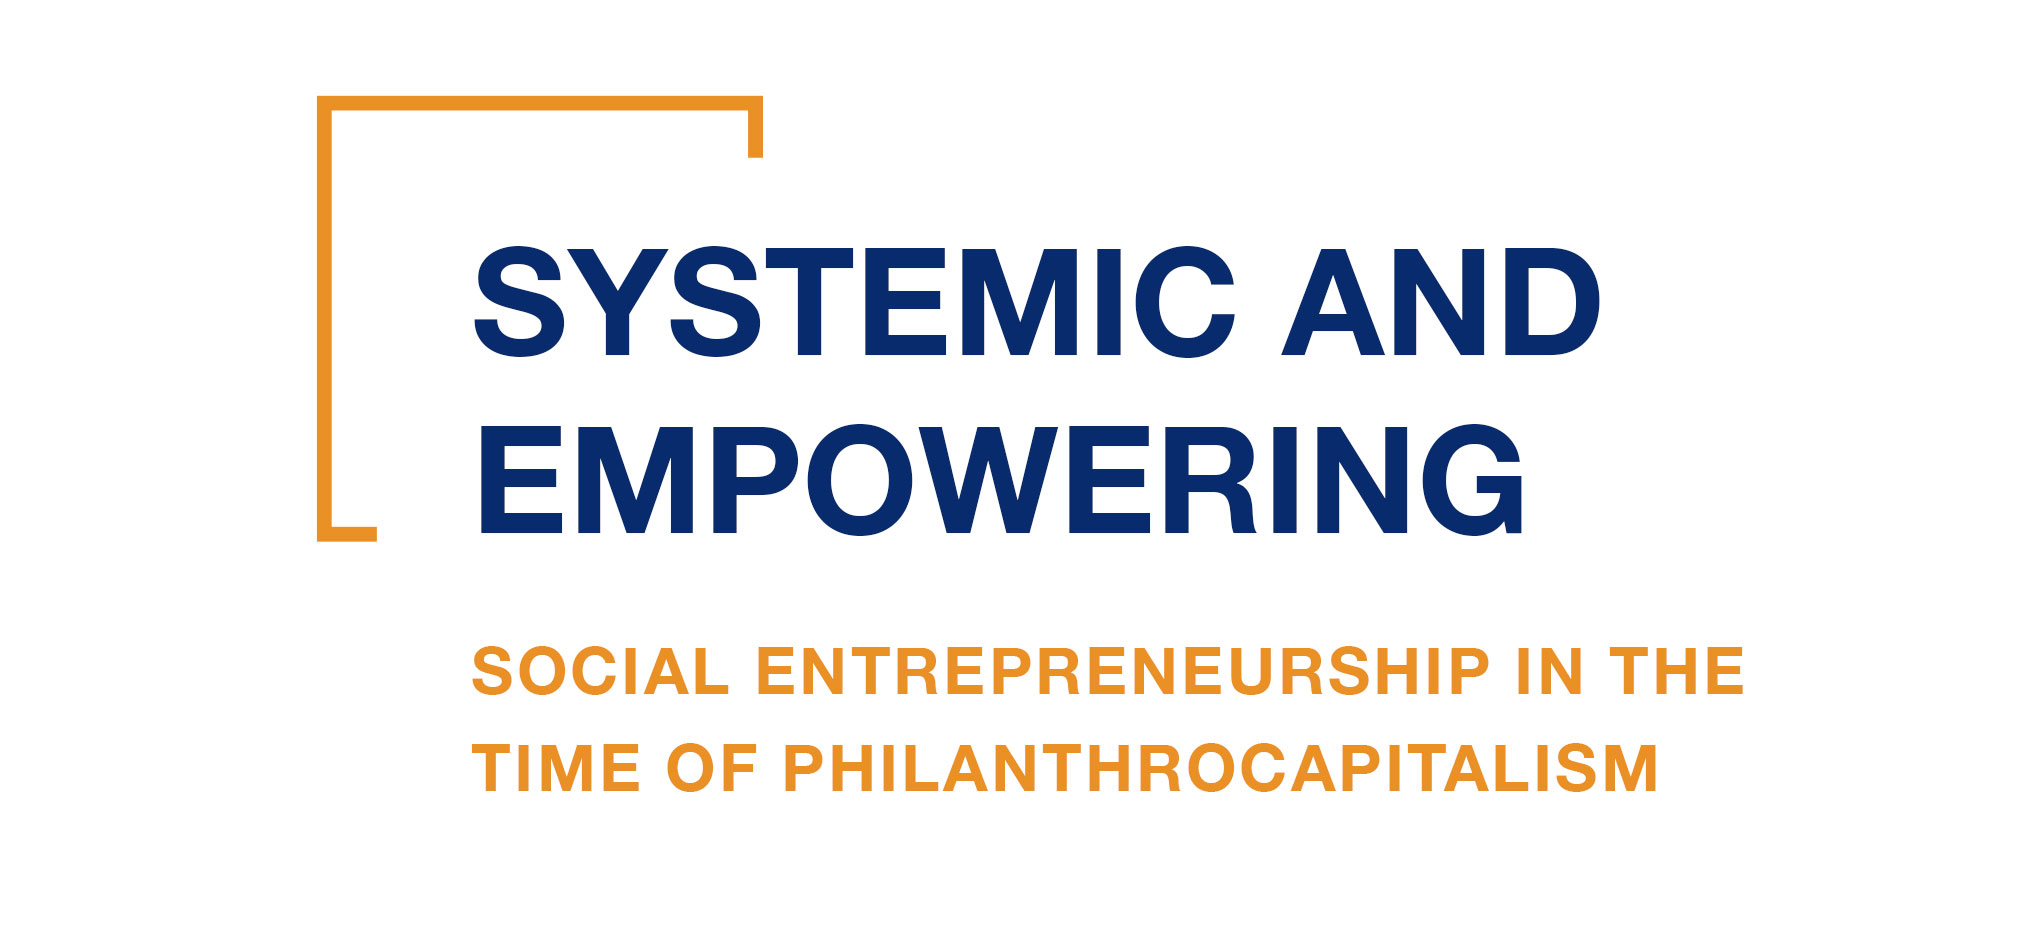 A web banner that reads Systemic and Empowering Social Entrepreneurship in the Time of Philanthro-capitalism